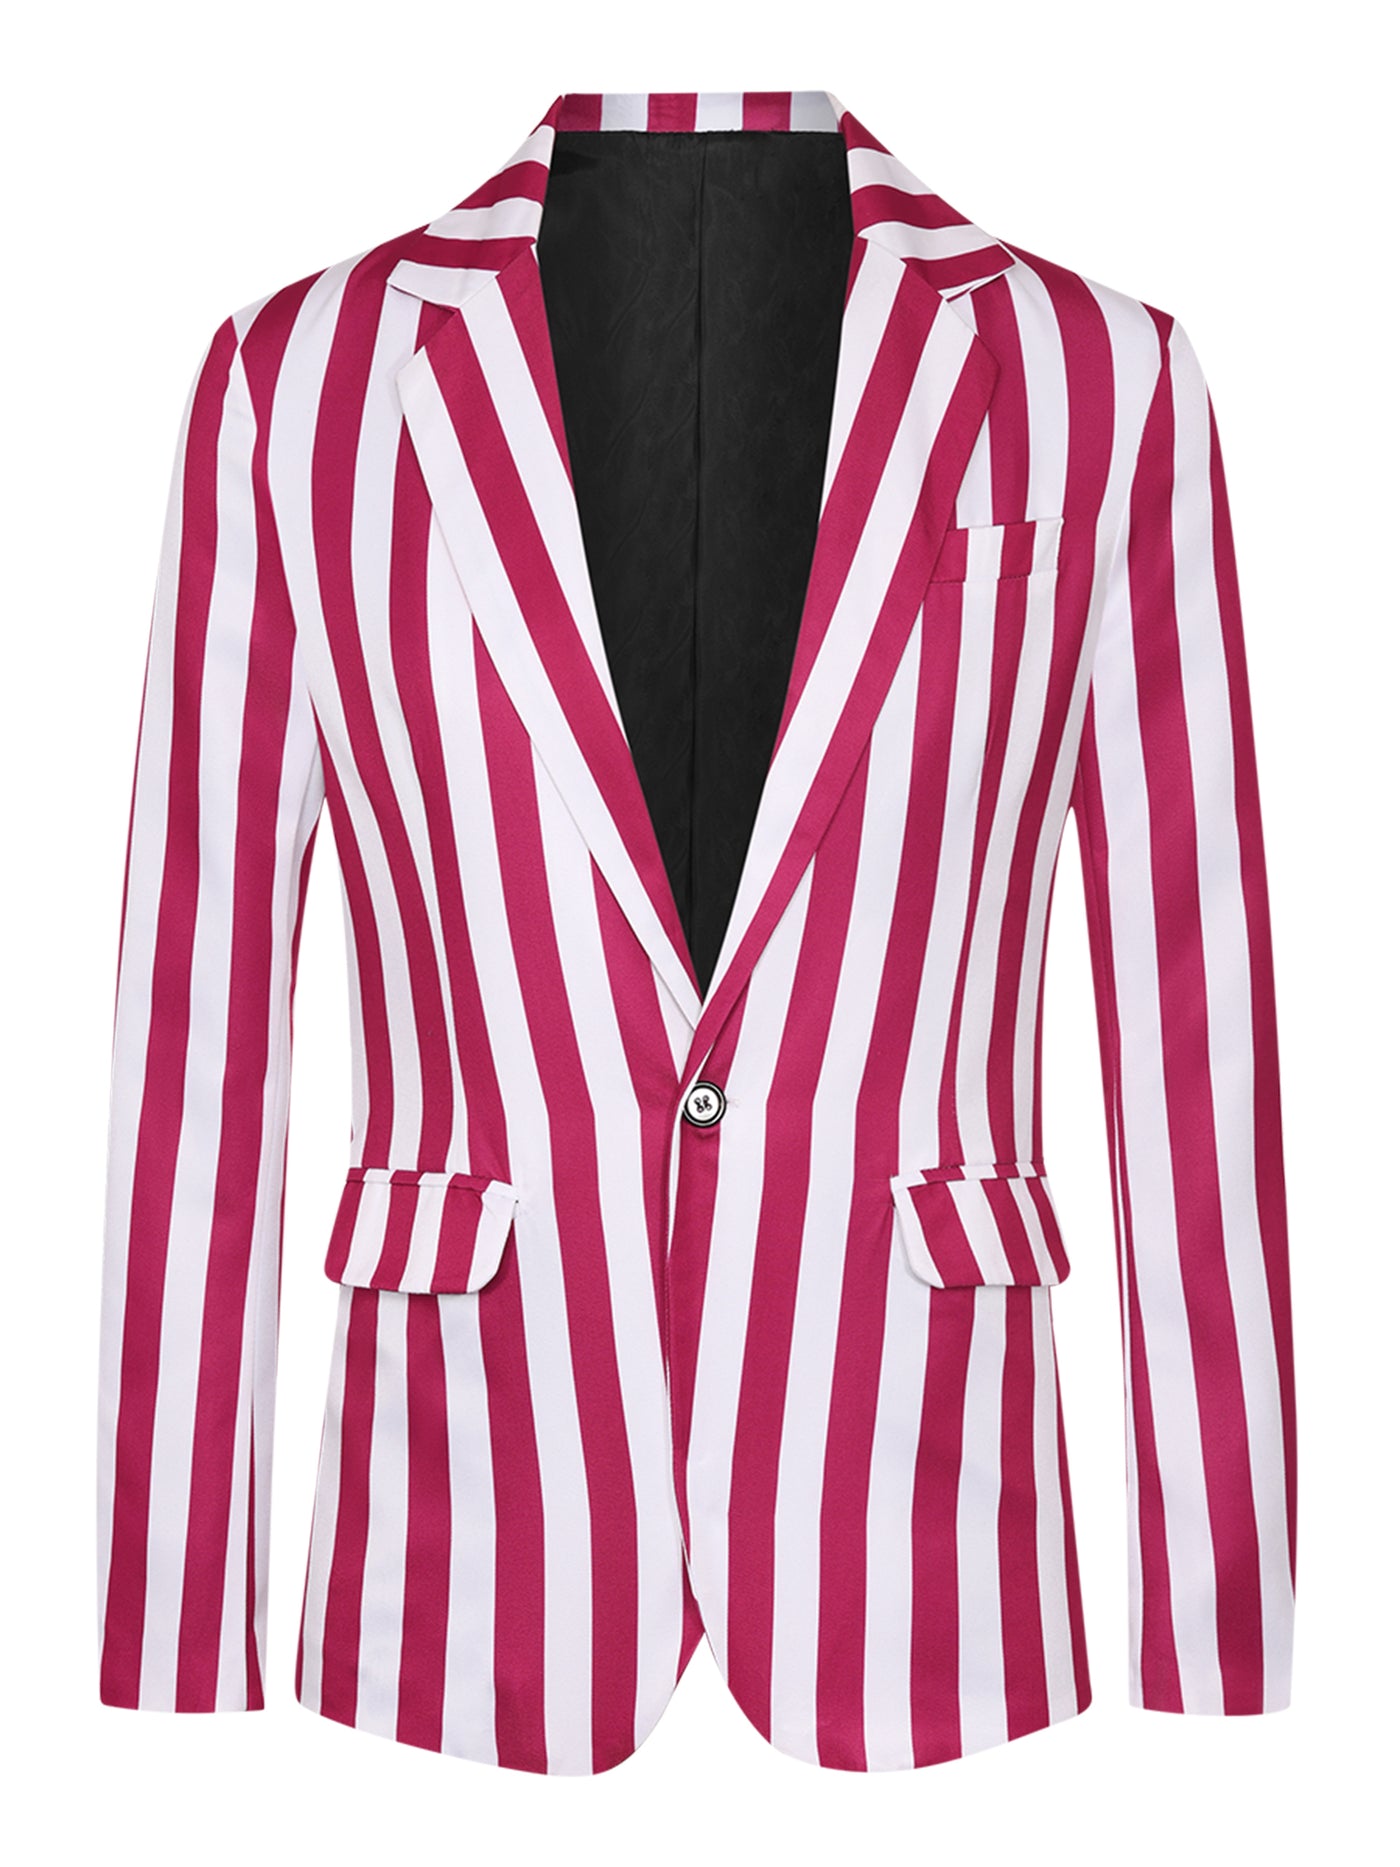 Bublédon Striped Blazers for Men's One Button Business Stripes Patterned Sports Coats